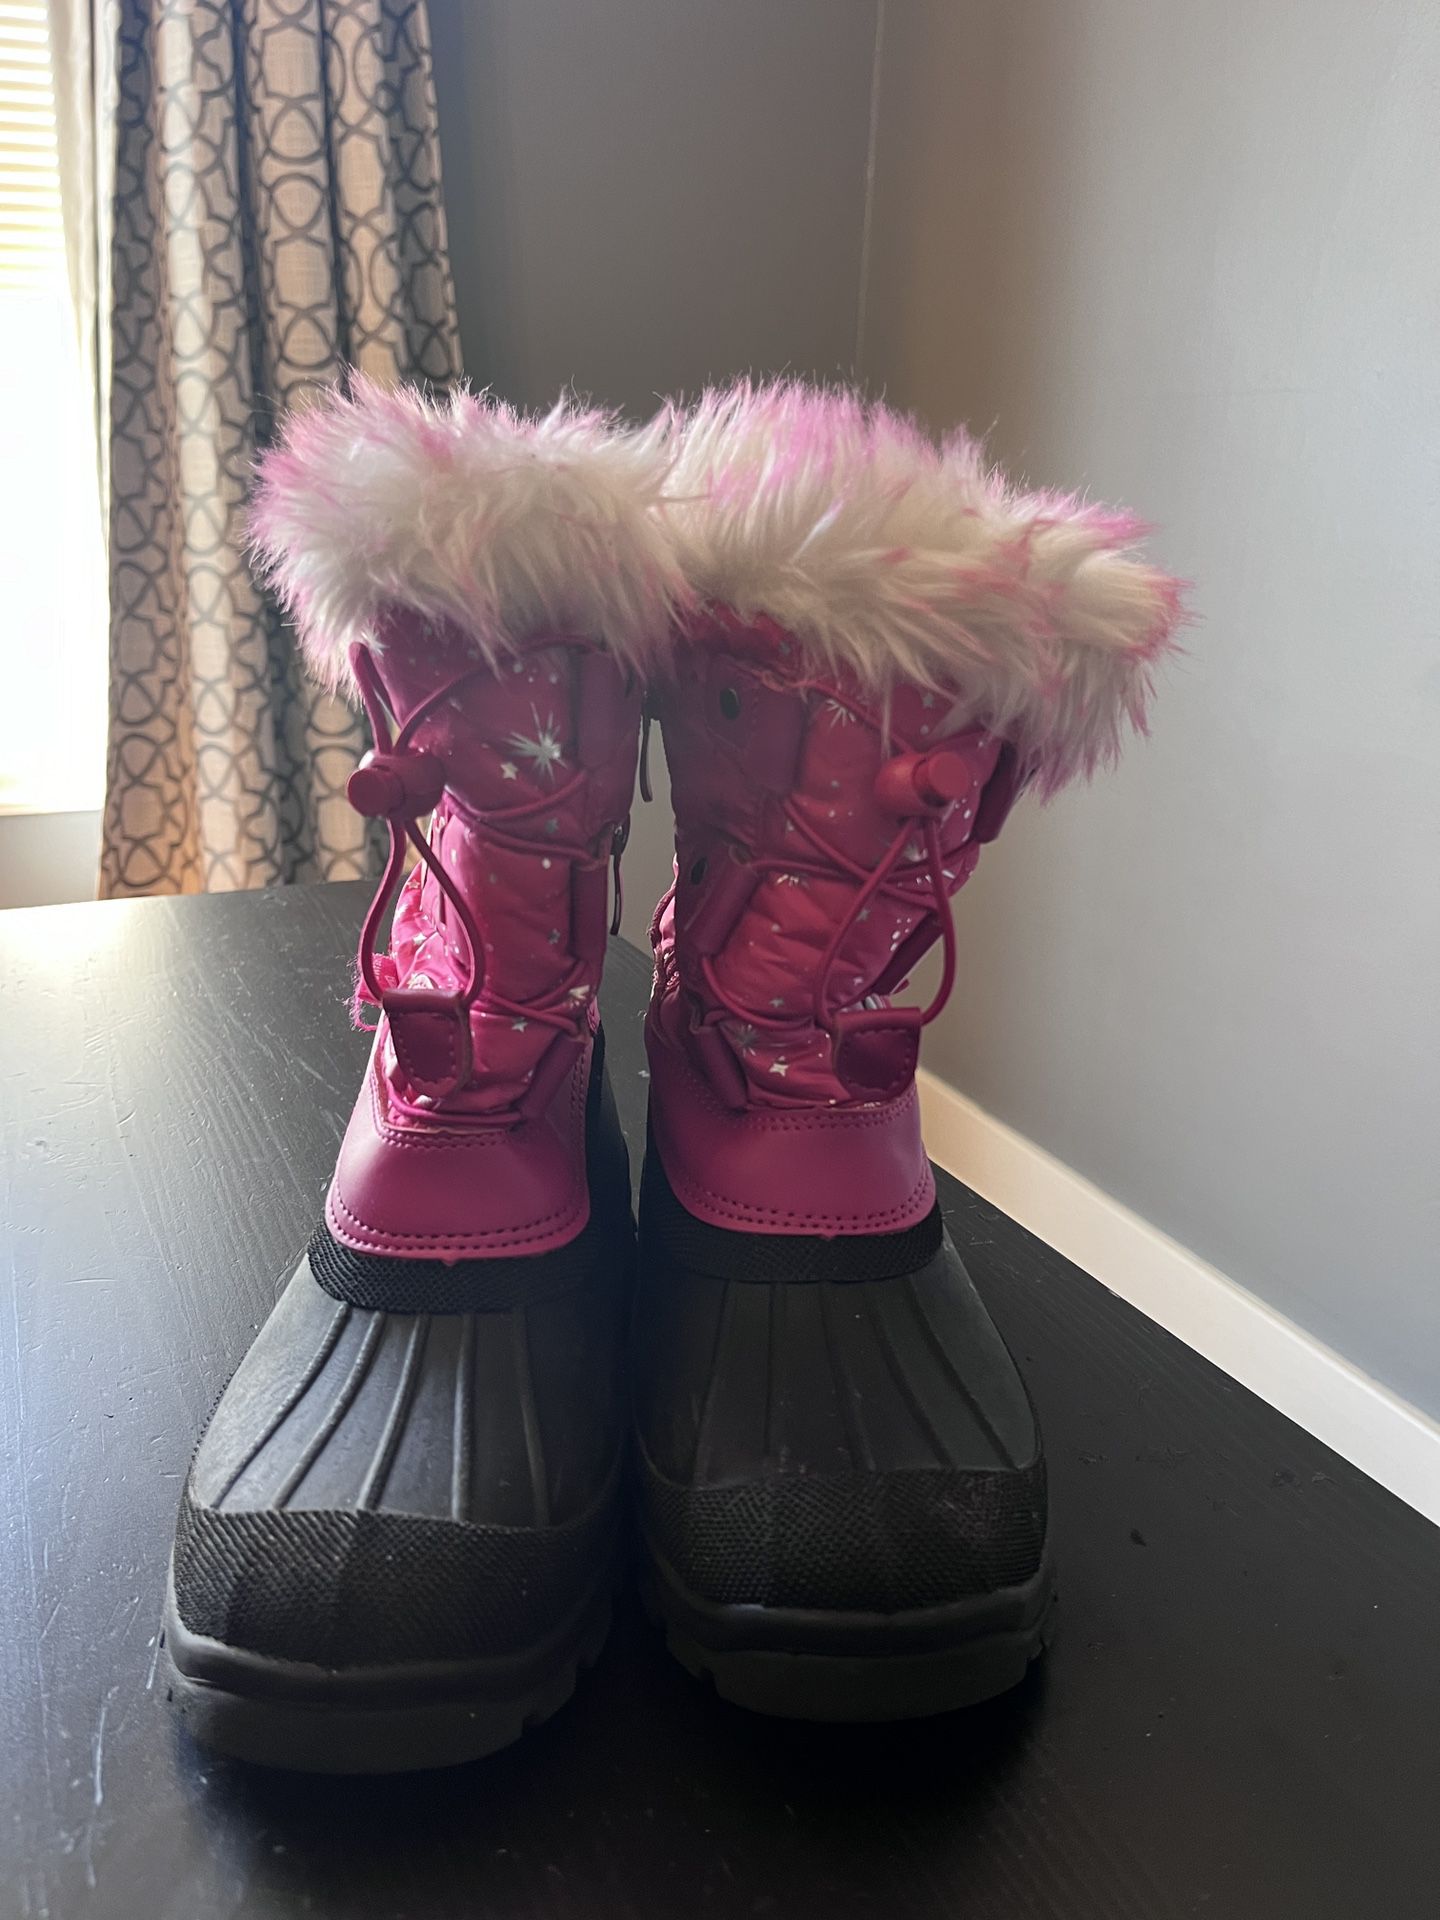 Dream Pairs Girl Snow Boots Size 2